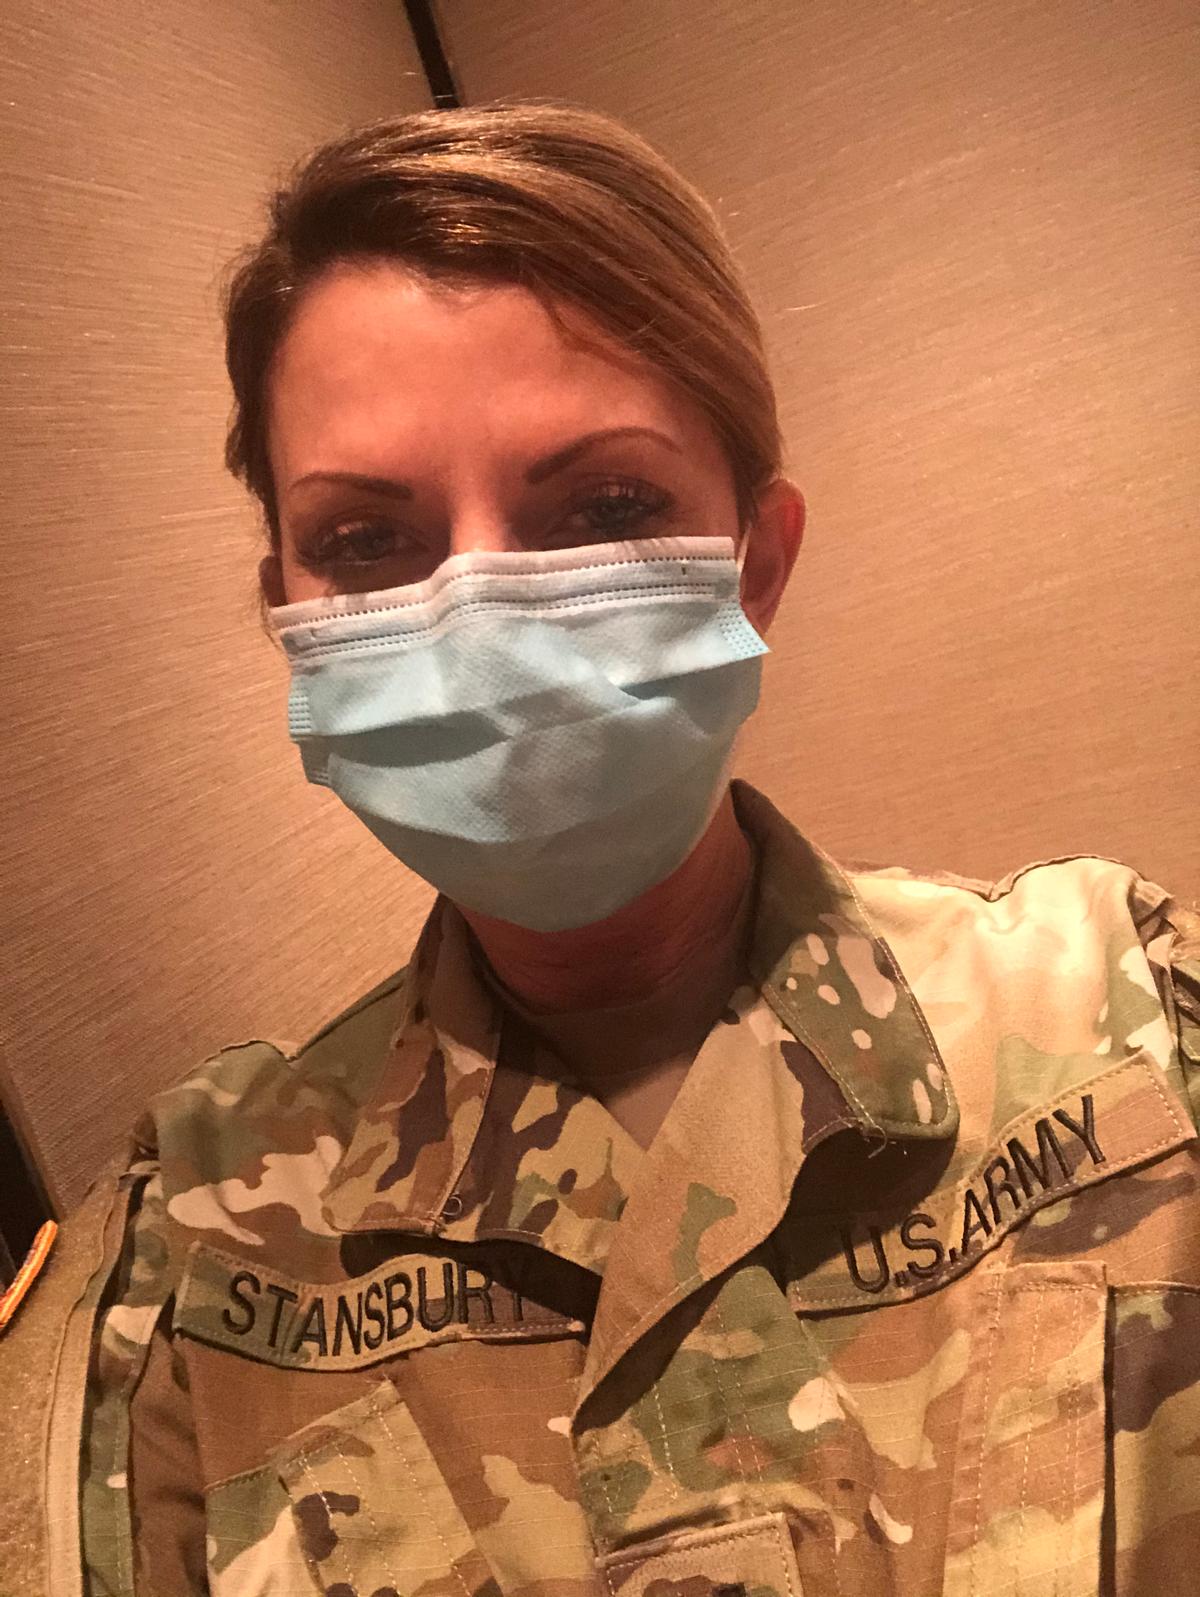  (<a href="https://www.dvidshub.net/image/6345910/louisiana-nurse-practitioner-realizes-dream-serve-army-supports-federal-covid-response-texas-her-first-mobilization">DVIDSHUB</a>)